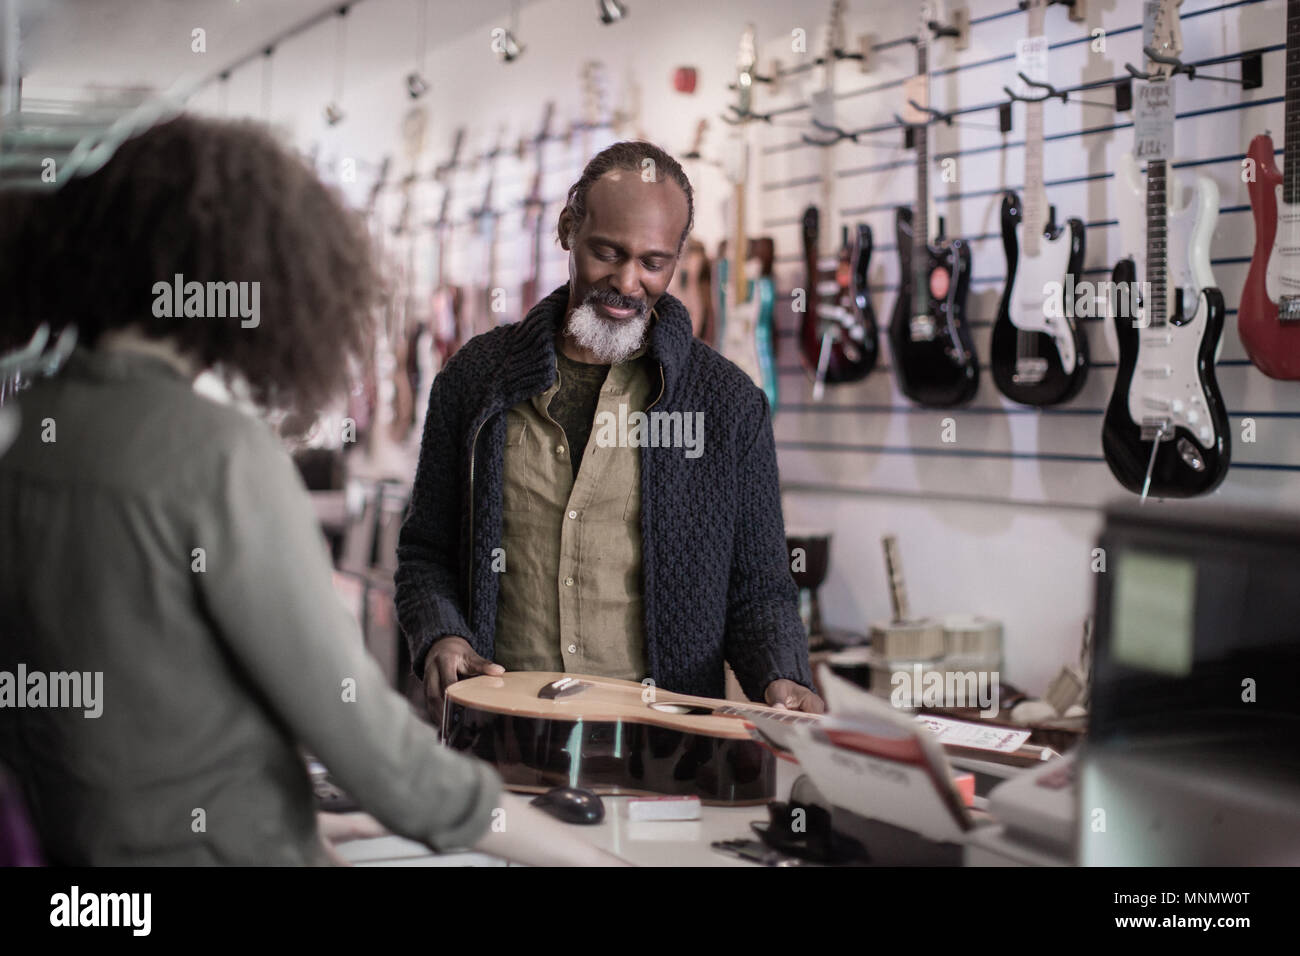 Senior male buying an acoustic guitar Stock Photo